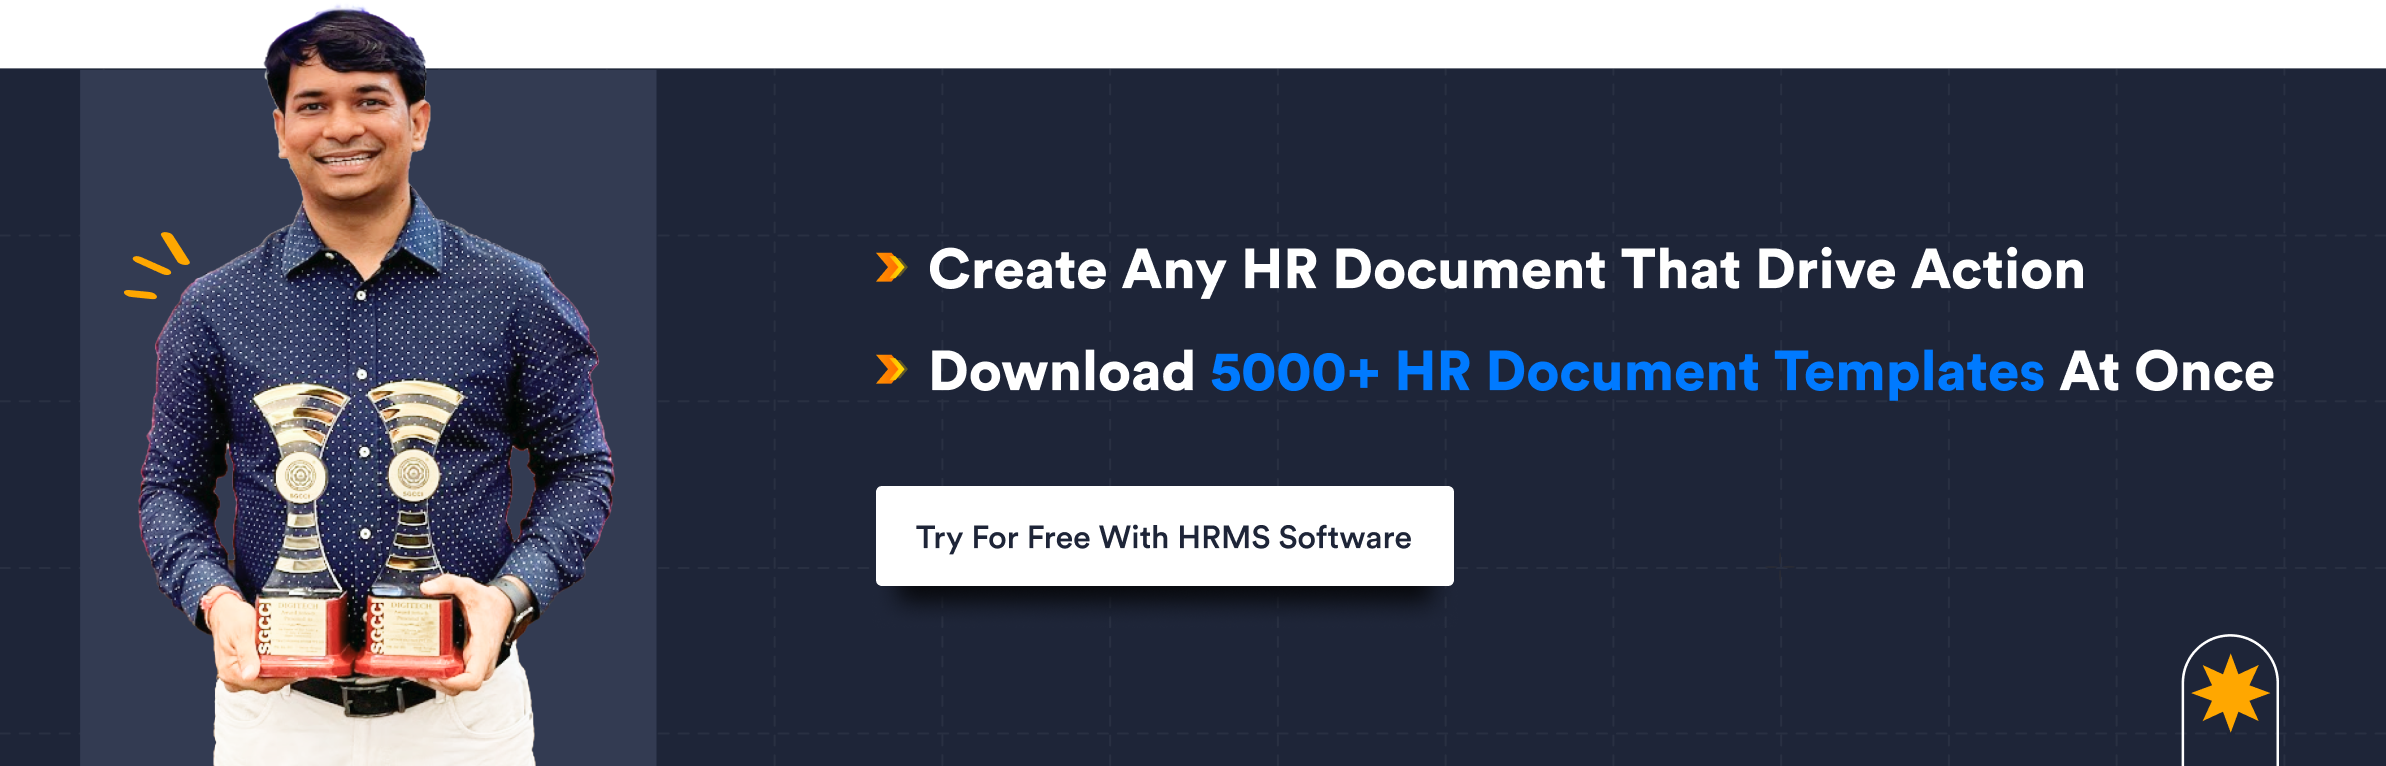 Create Any HR Document That Drive Action 3